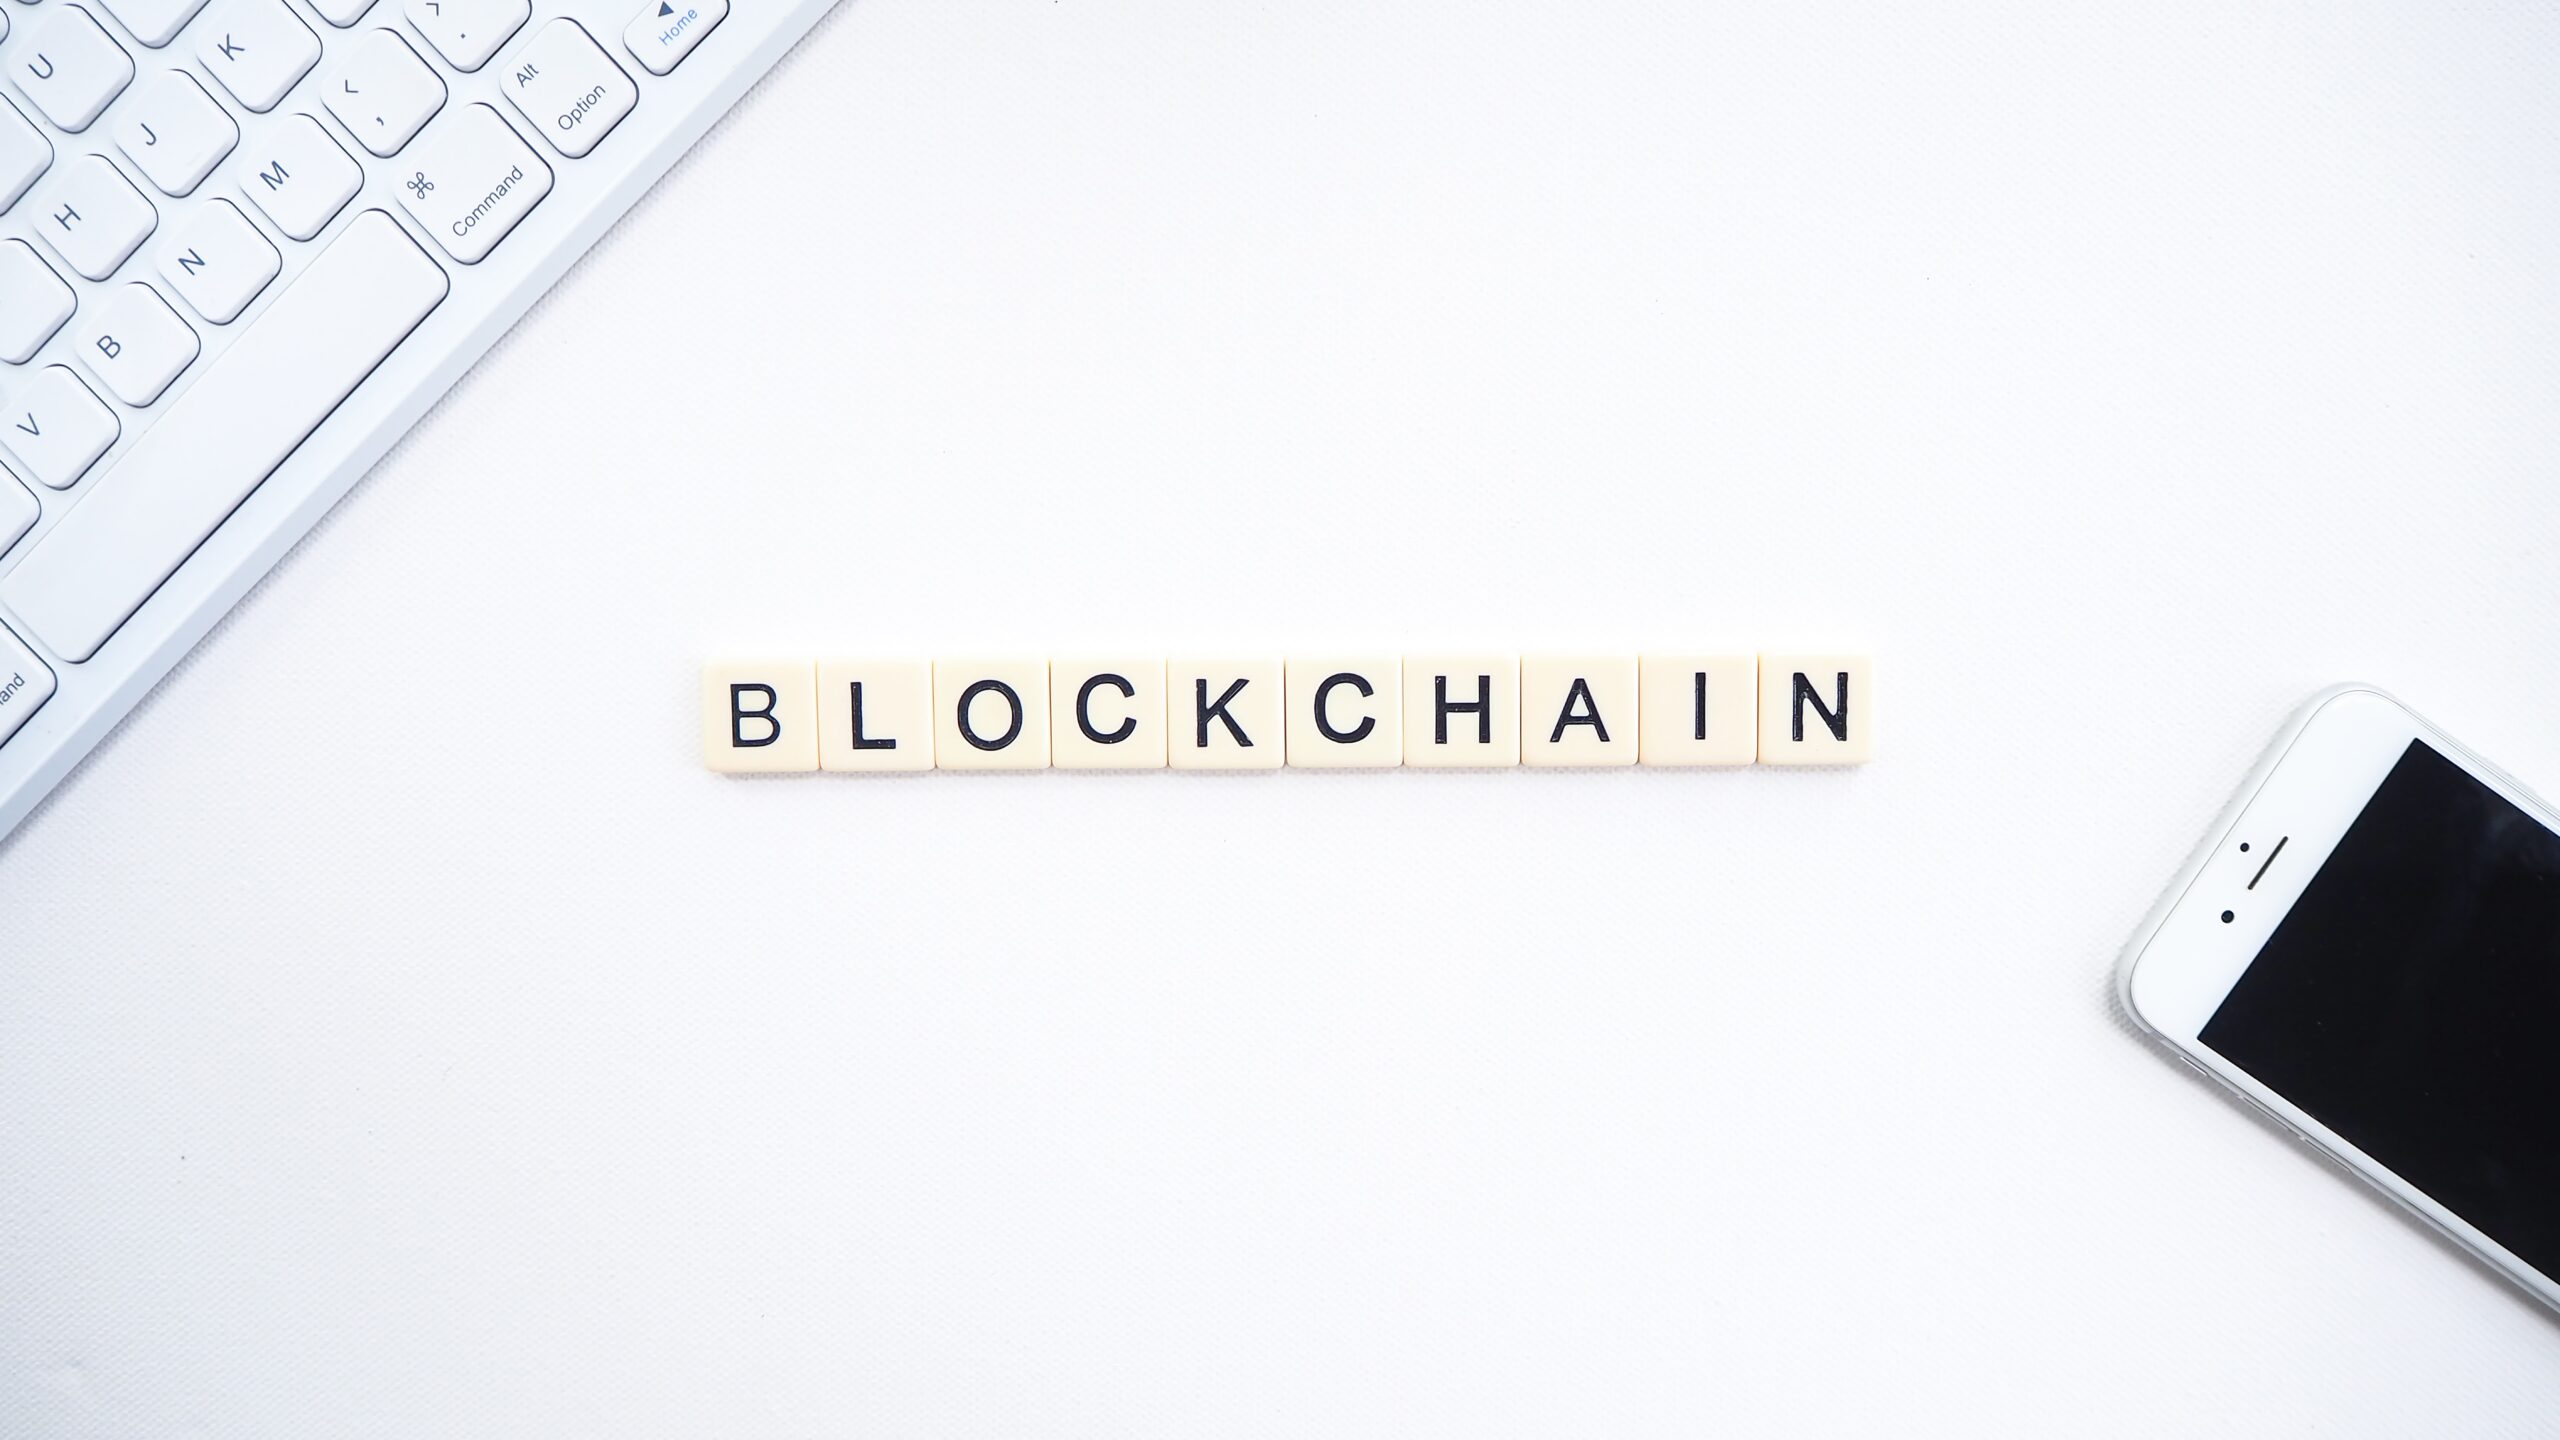 Blockchain Technology and related Patent Protections